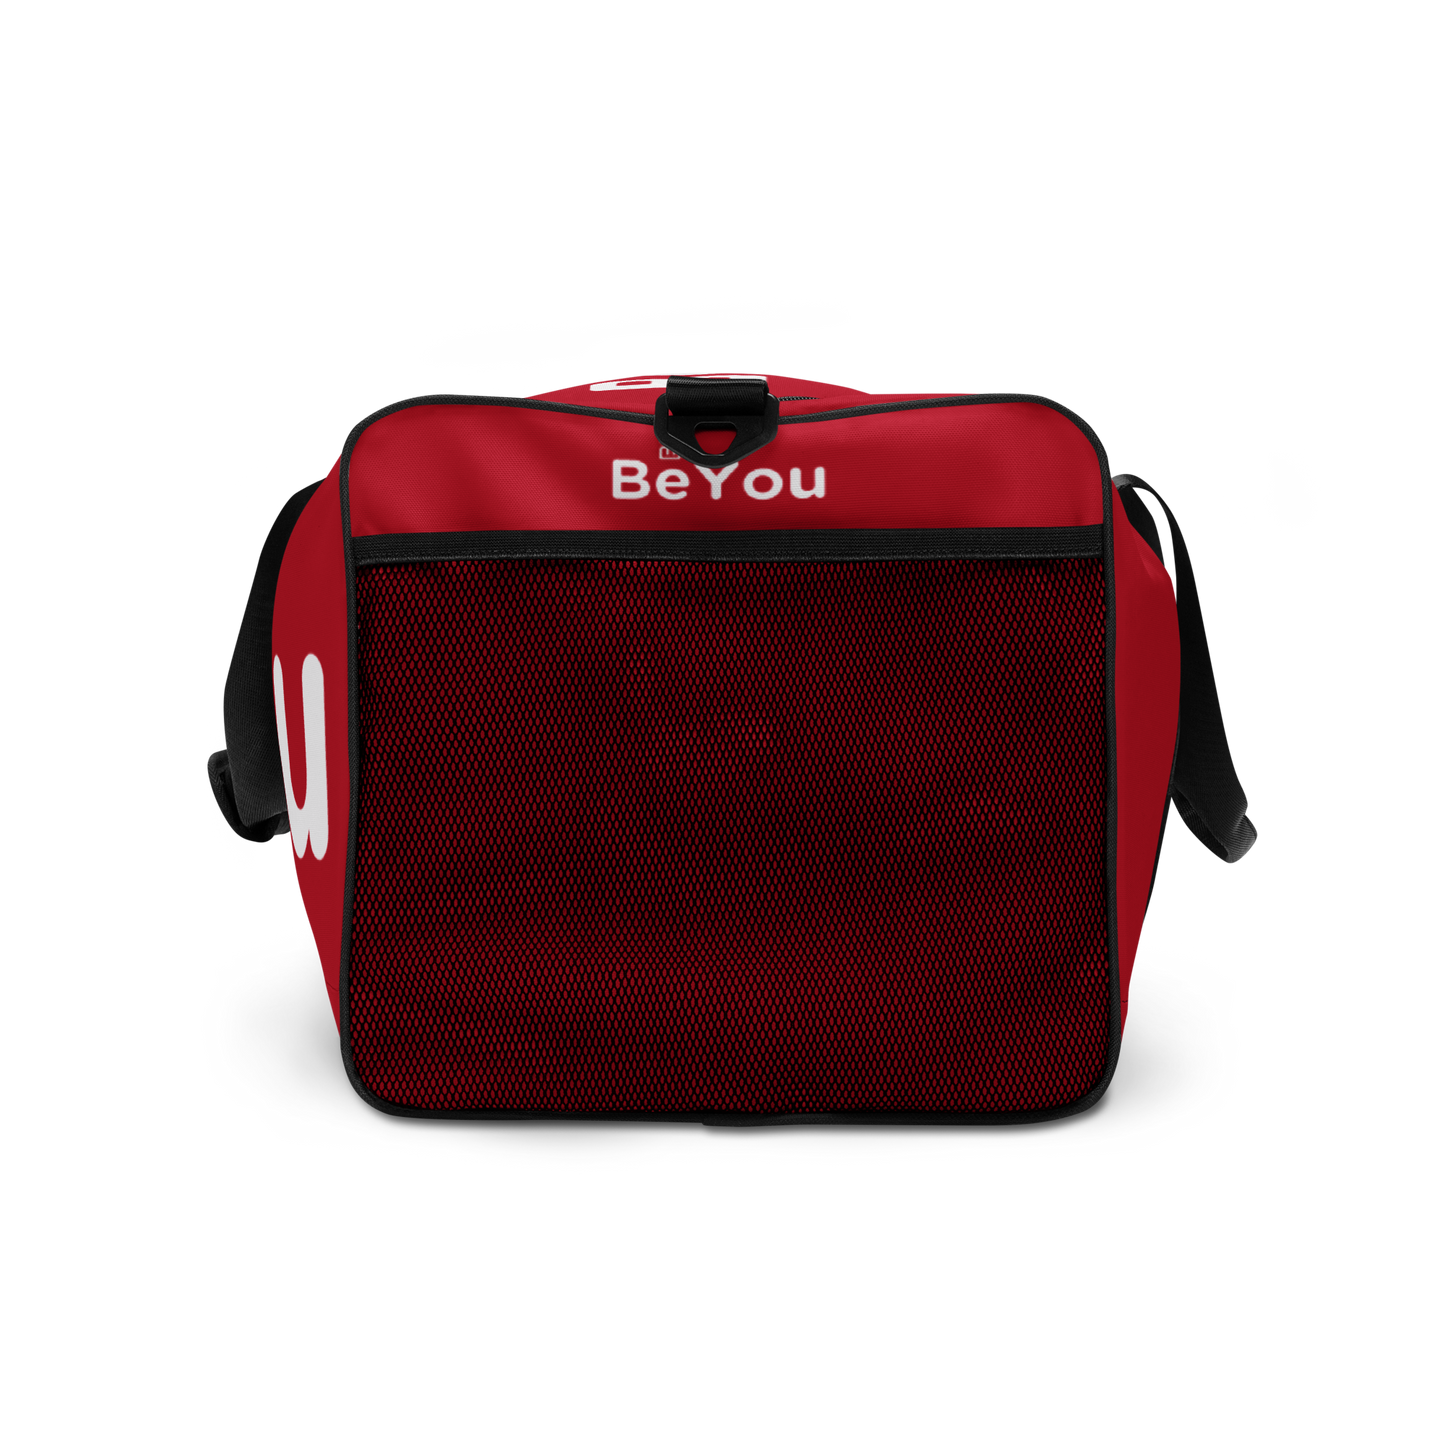 Red Duffle Large Travel Workout Bag